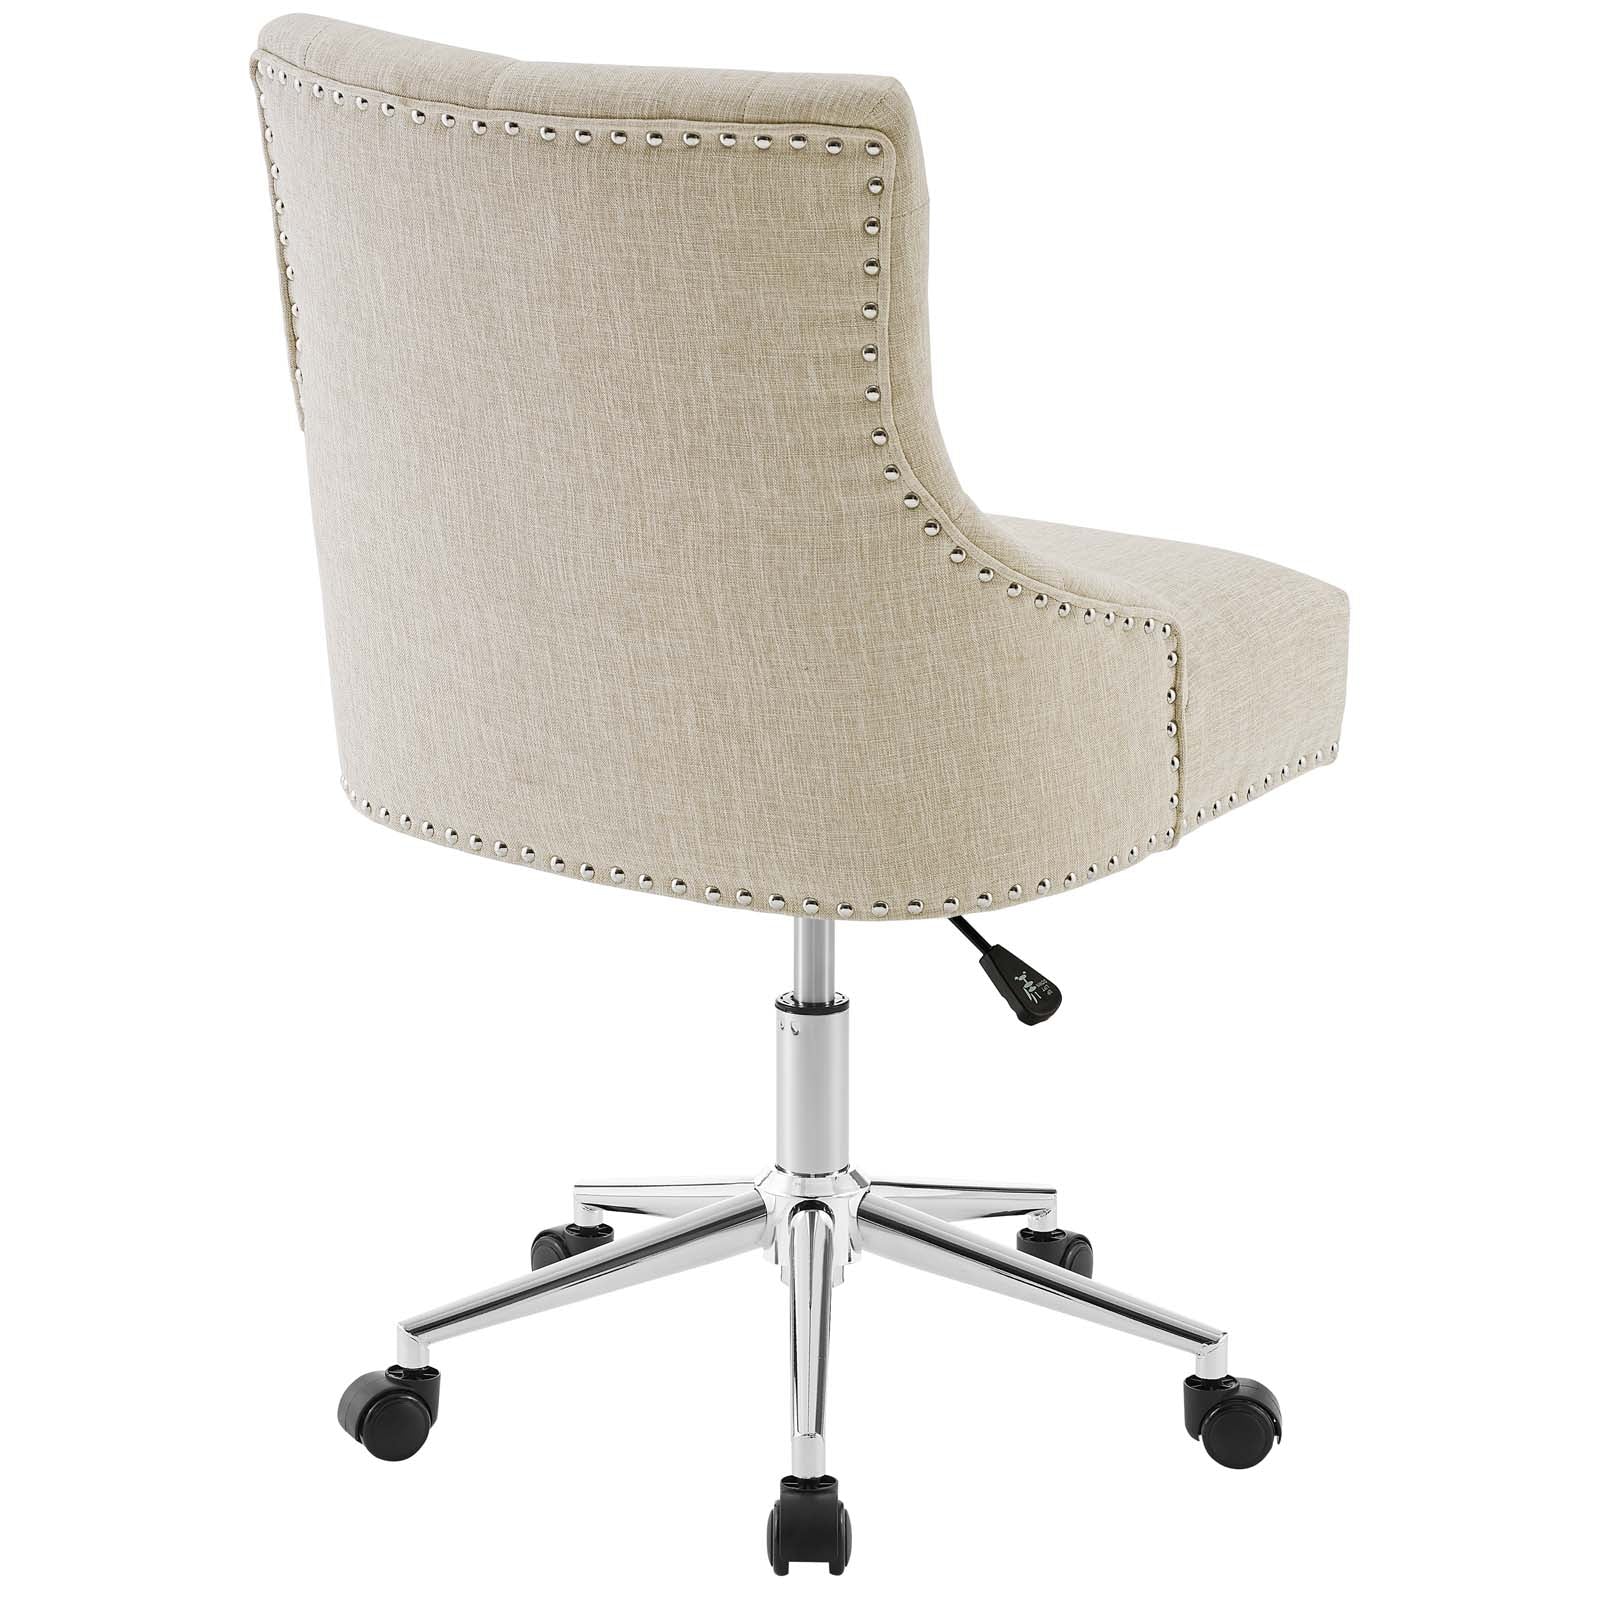 Modway Task Chairs - Regent Tufted Button Swivel Upholstered Fabric Office Chair Beige